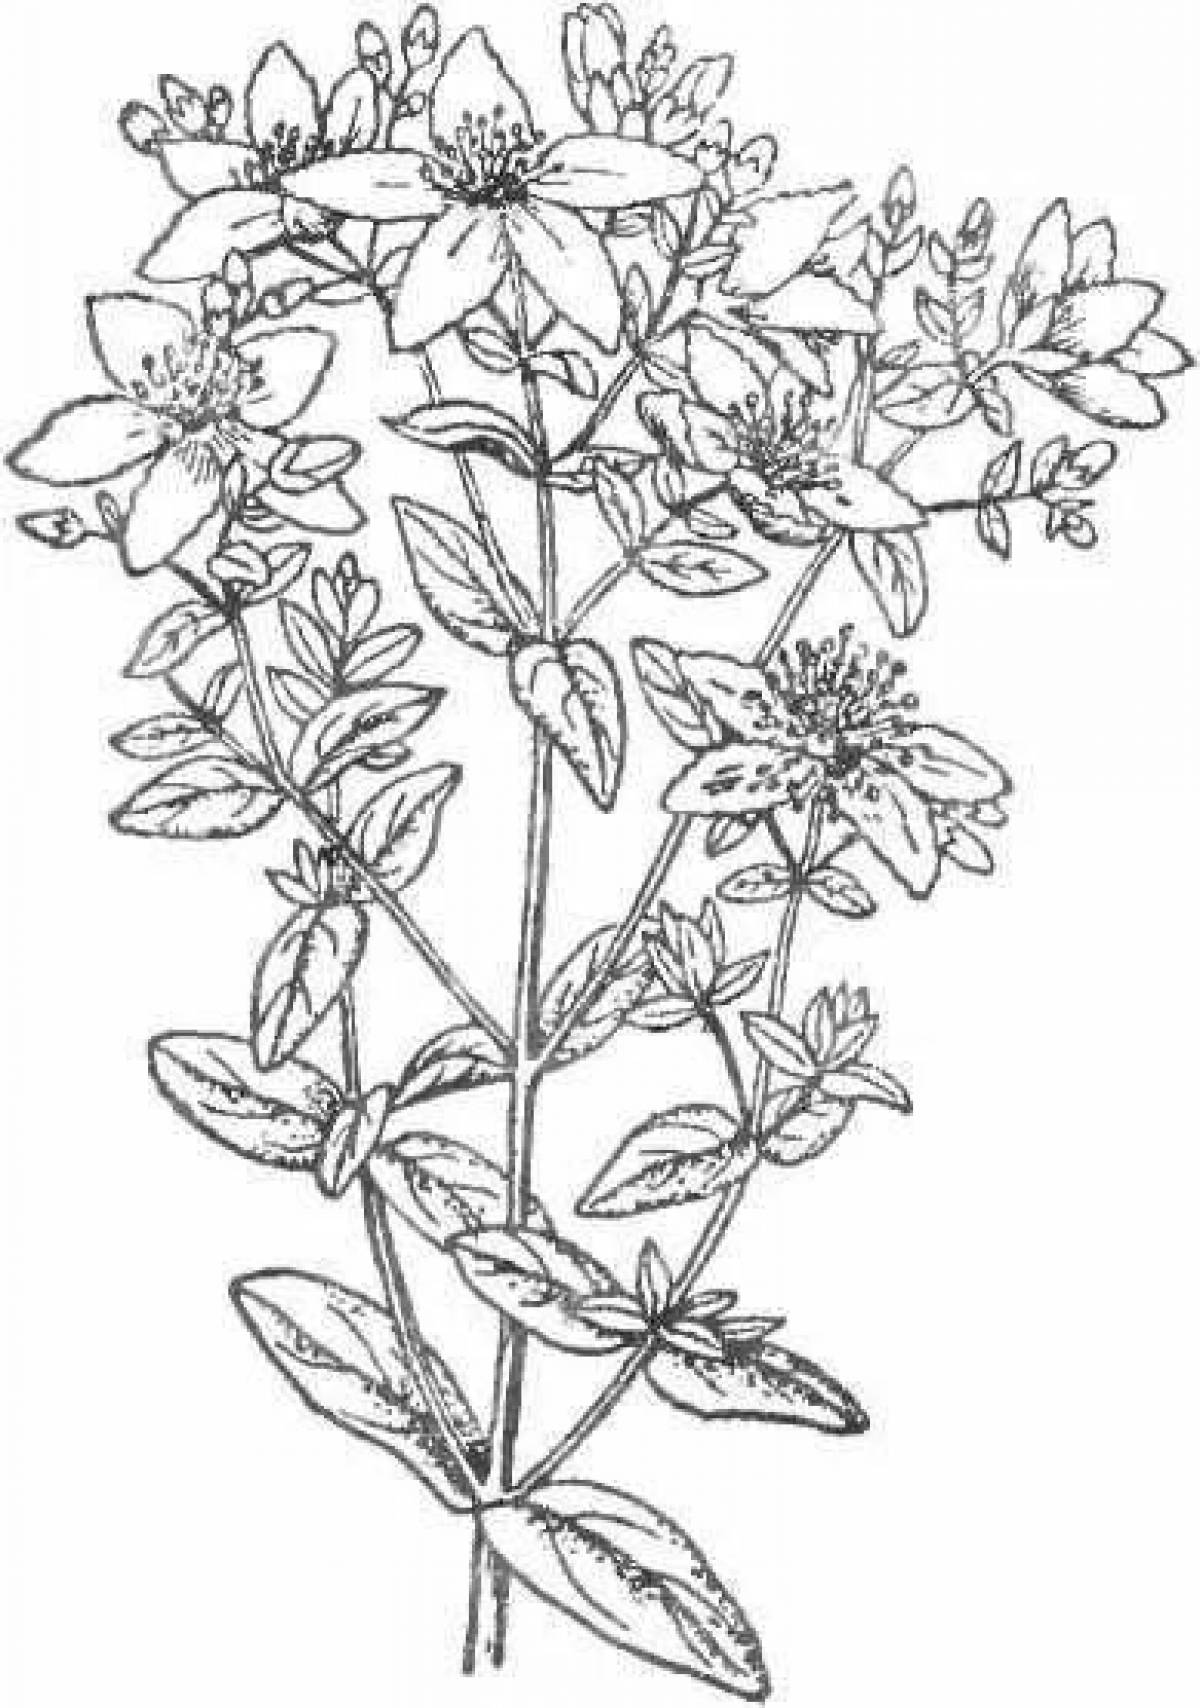 Colourful St. John's wort coloring book